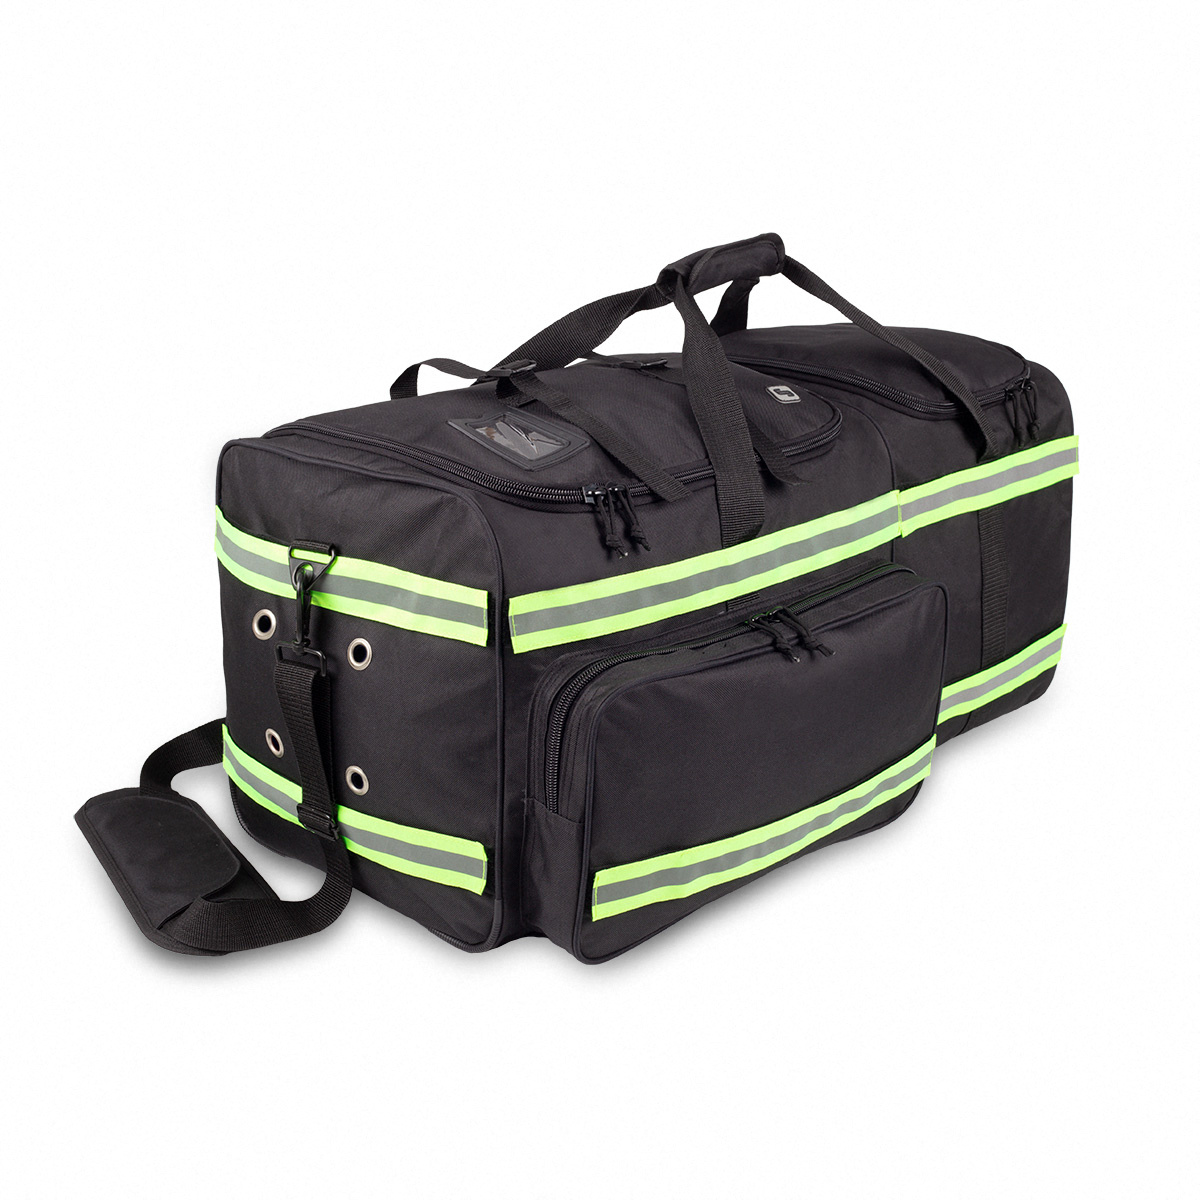 OccuNomix | Engineered Tough Safety Gear - Large Gear Bag with Wheels